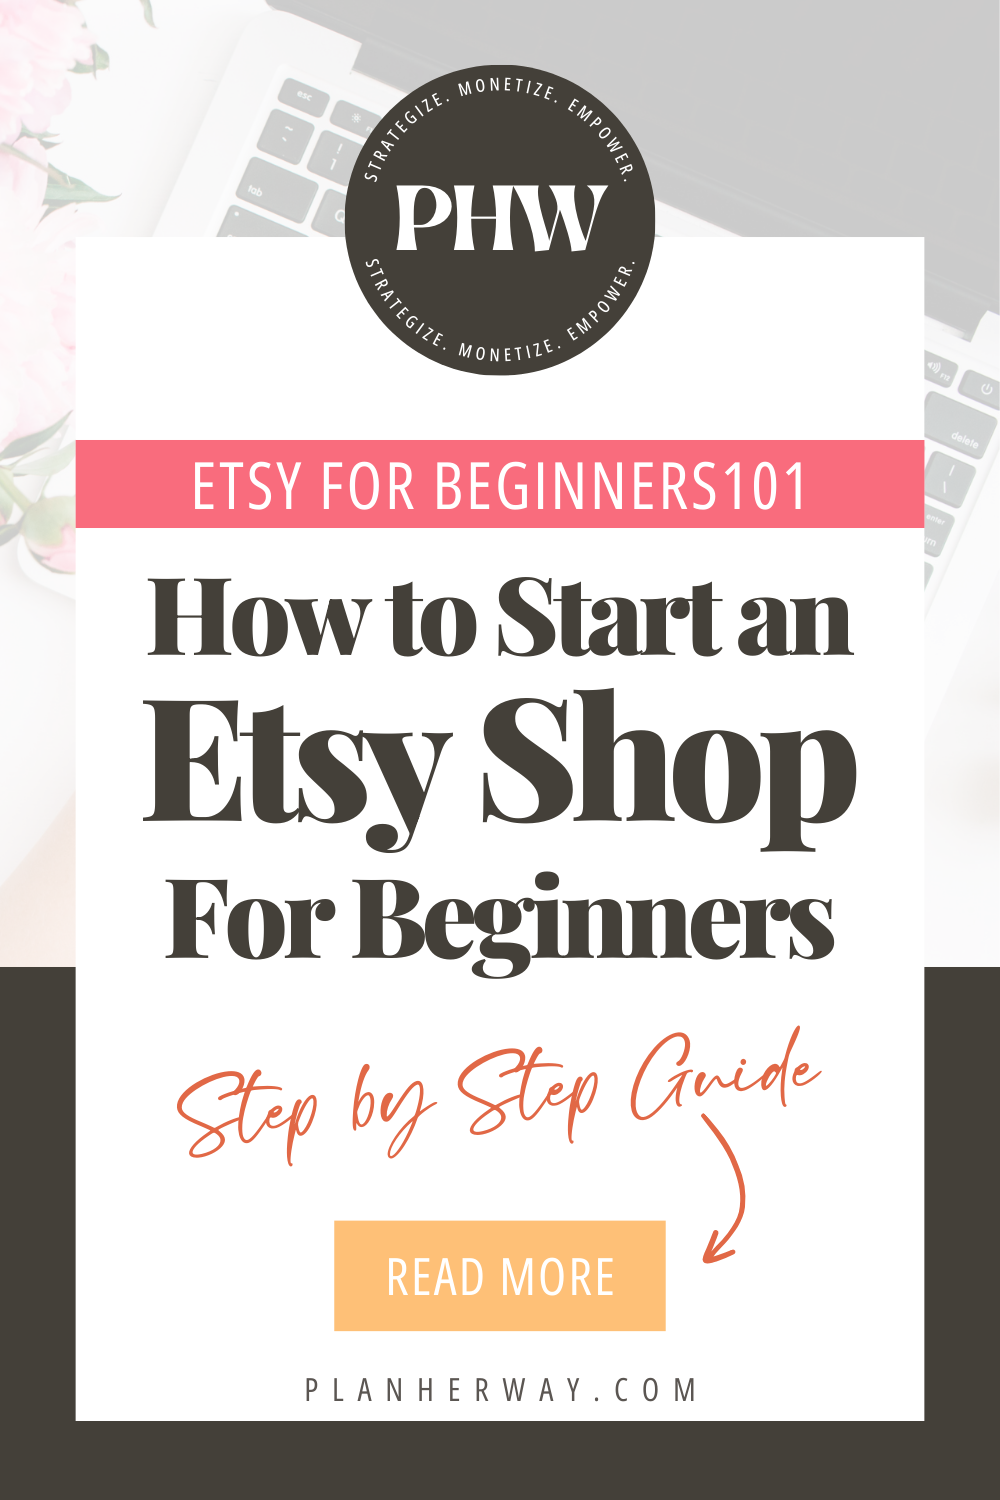 How to Start an Etsy Shop for Beginners